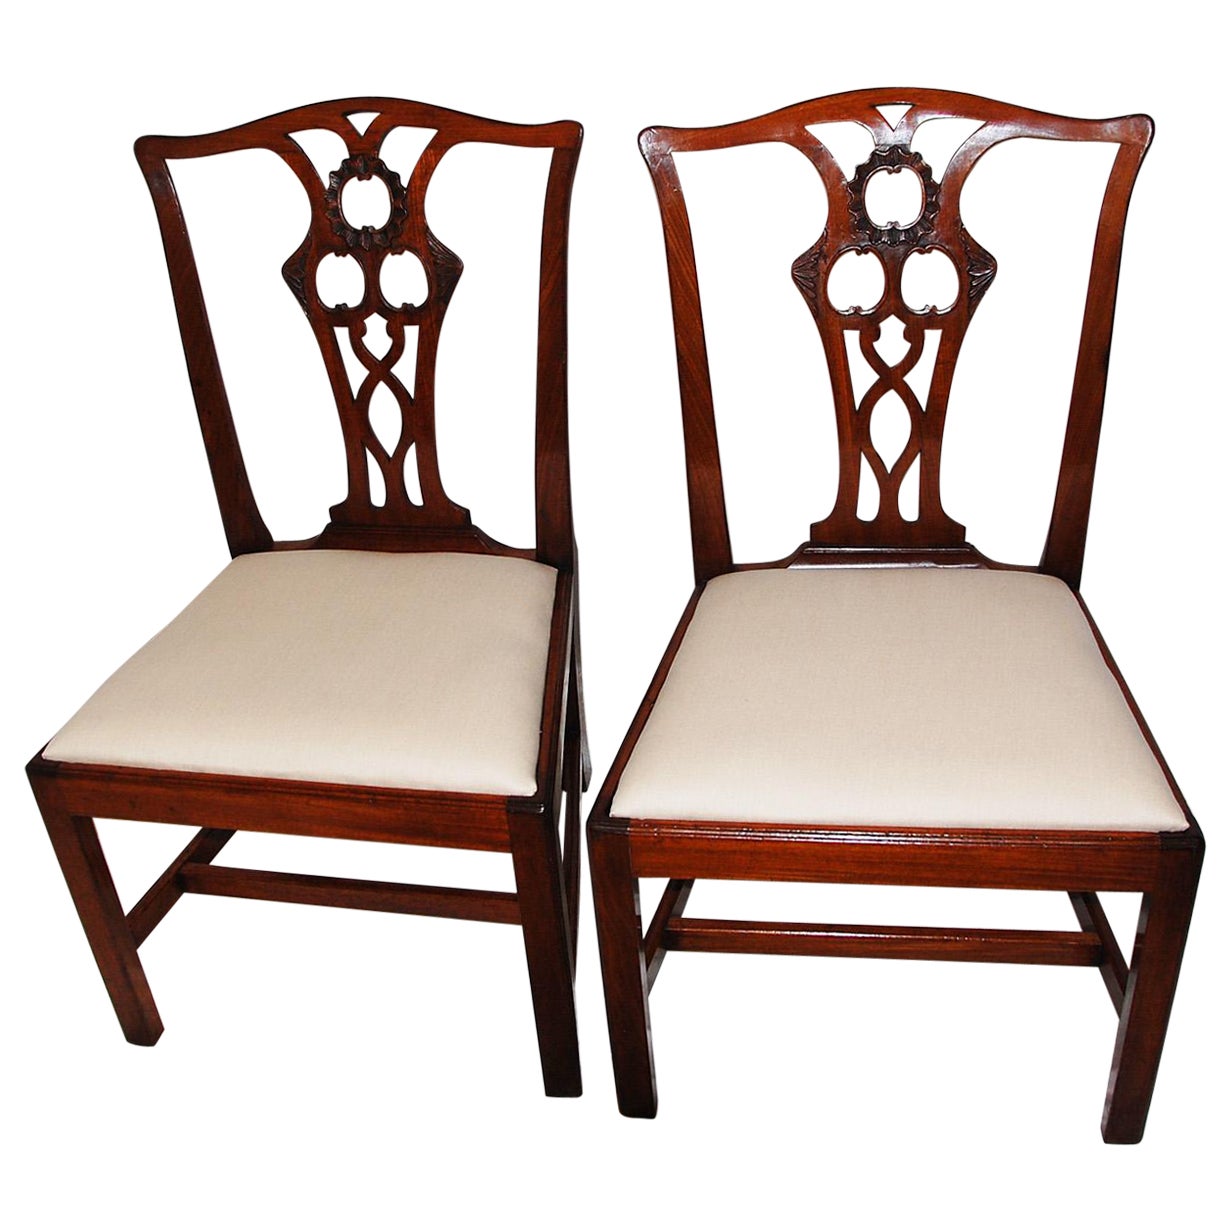 English Georgian Period Chippendale Pair of Carved Mahogany Sidechairs